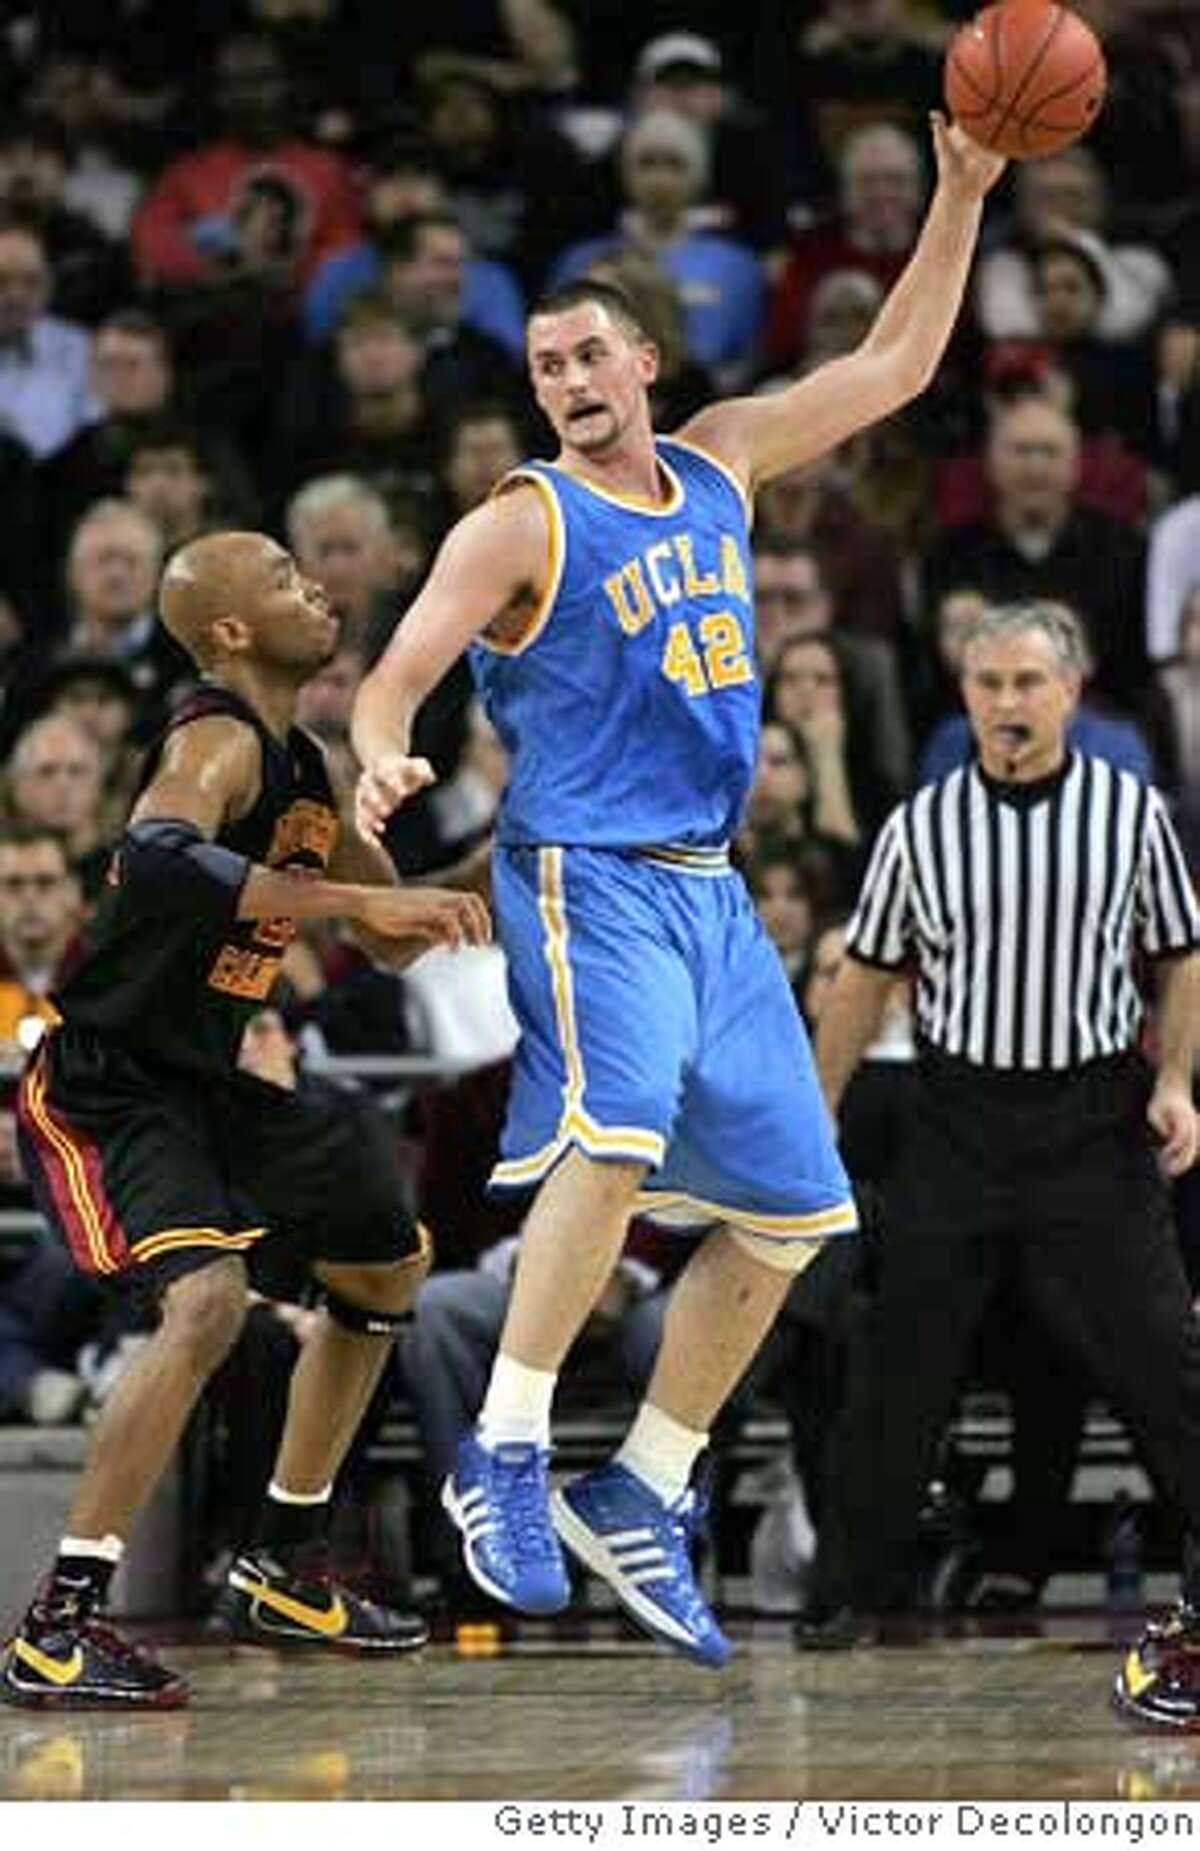 ###Live Caption:LOS ANGELES, CA - FEBRUARY 17: Kevin Love #42 of the UCLA Bruins gets the ball in the low post against Taj Gibson #22 of the USC Trojans in the first half during their Pac-10 Conference game at the Galen Center on February 17, 2008 in Los Angeles, California. (Photo by Victor Decolongon/Getty Images)###Caption History:LOS ANGELES, CA - FEBRUARY 17: Kevin Love #42 of the UCLA Bruins gets the ball in the low post against Taj Gibson #22 of the USC Trojans in the first half during their Pac-10 Conference game at the Galen Center on February 17, 2008 in Los Angeles, California. (Photo by Victor Decolongon/Getty Images)###Notes:UCLA v USC###Special Instructions: